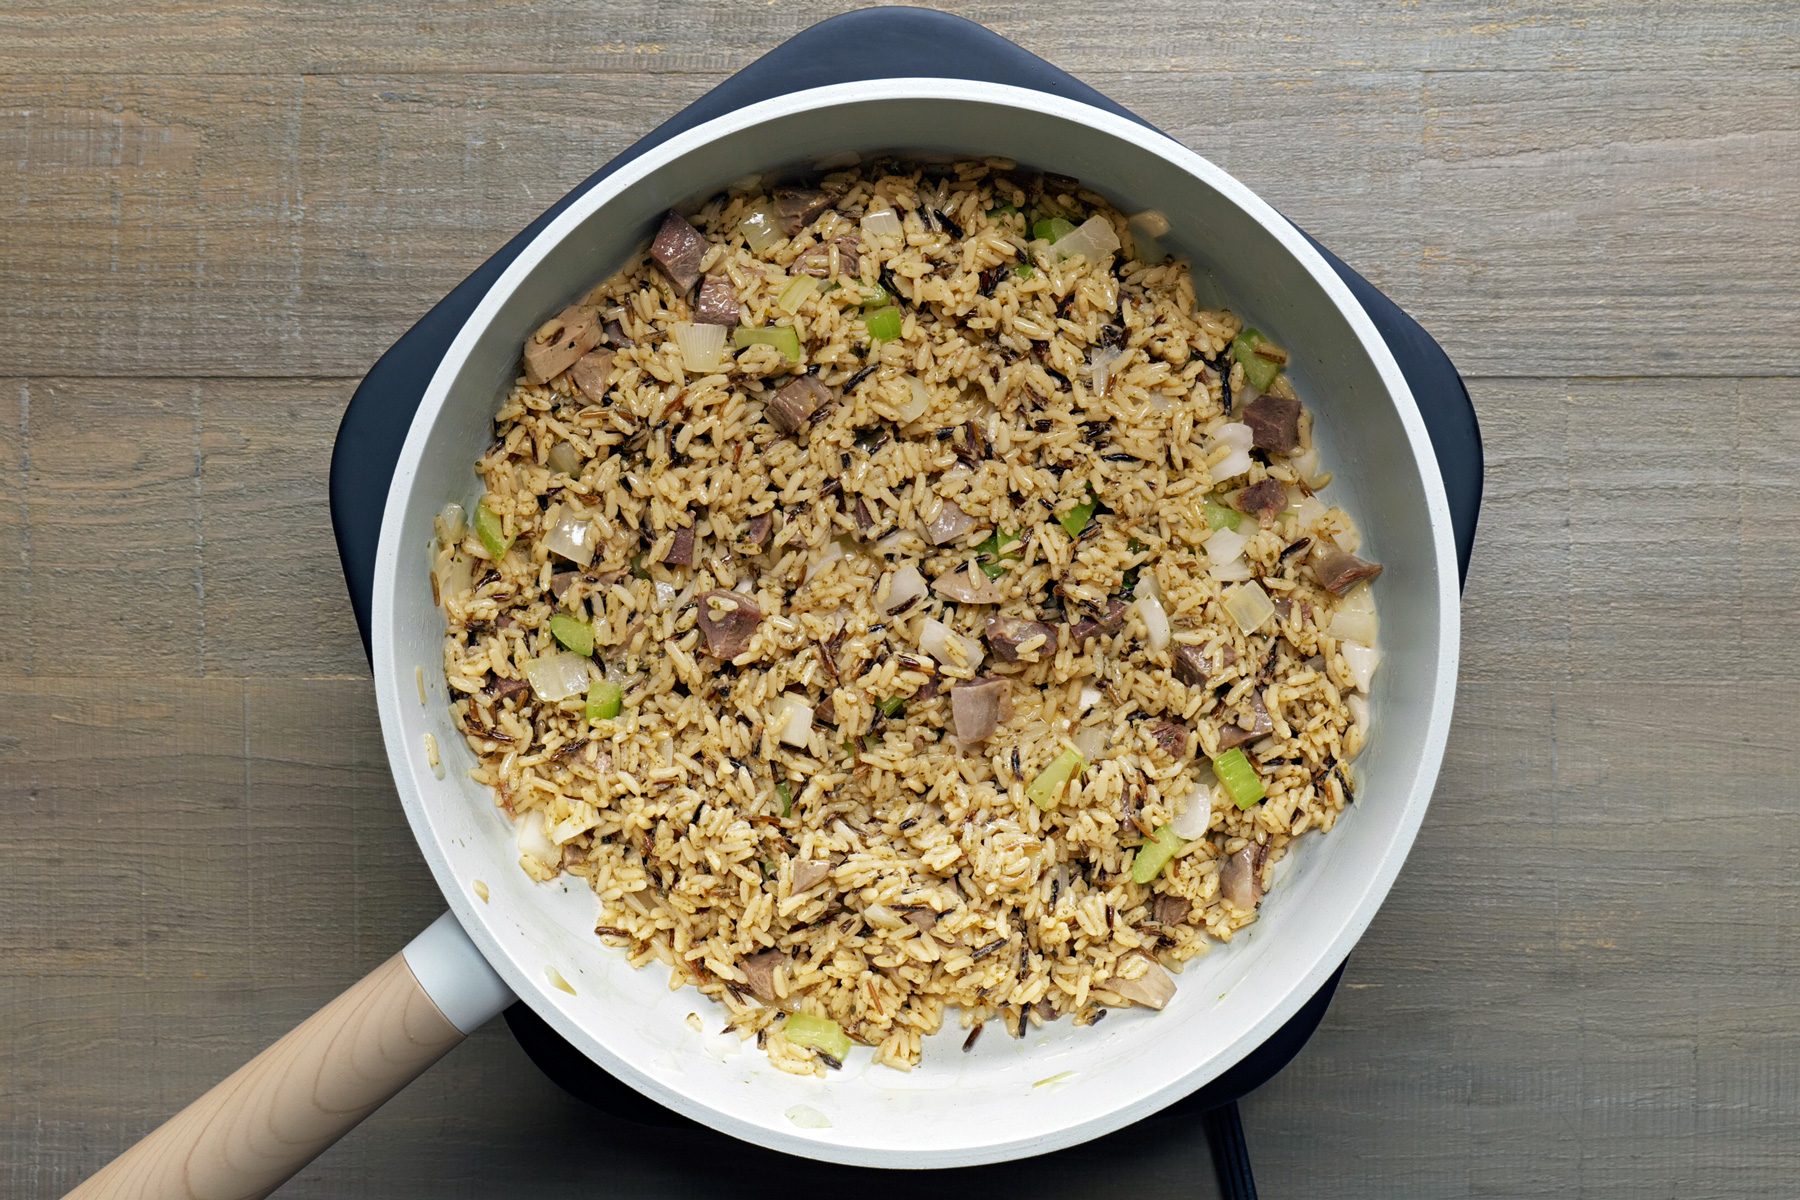 Mix the onions and celery into the cooked rice along with the stuffing mix, chicken broth and reserved giblets.